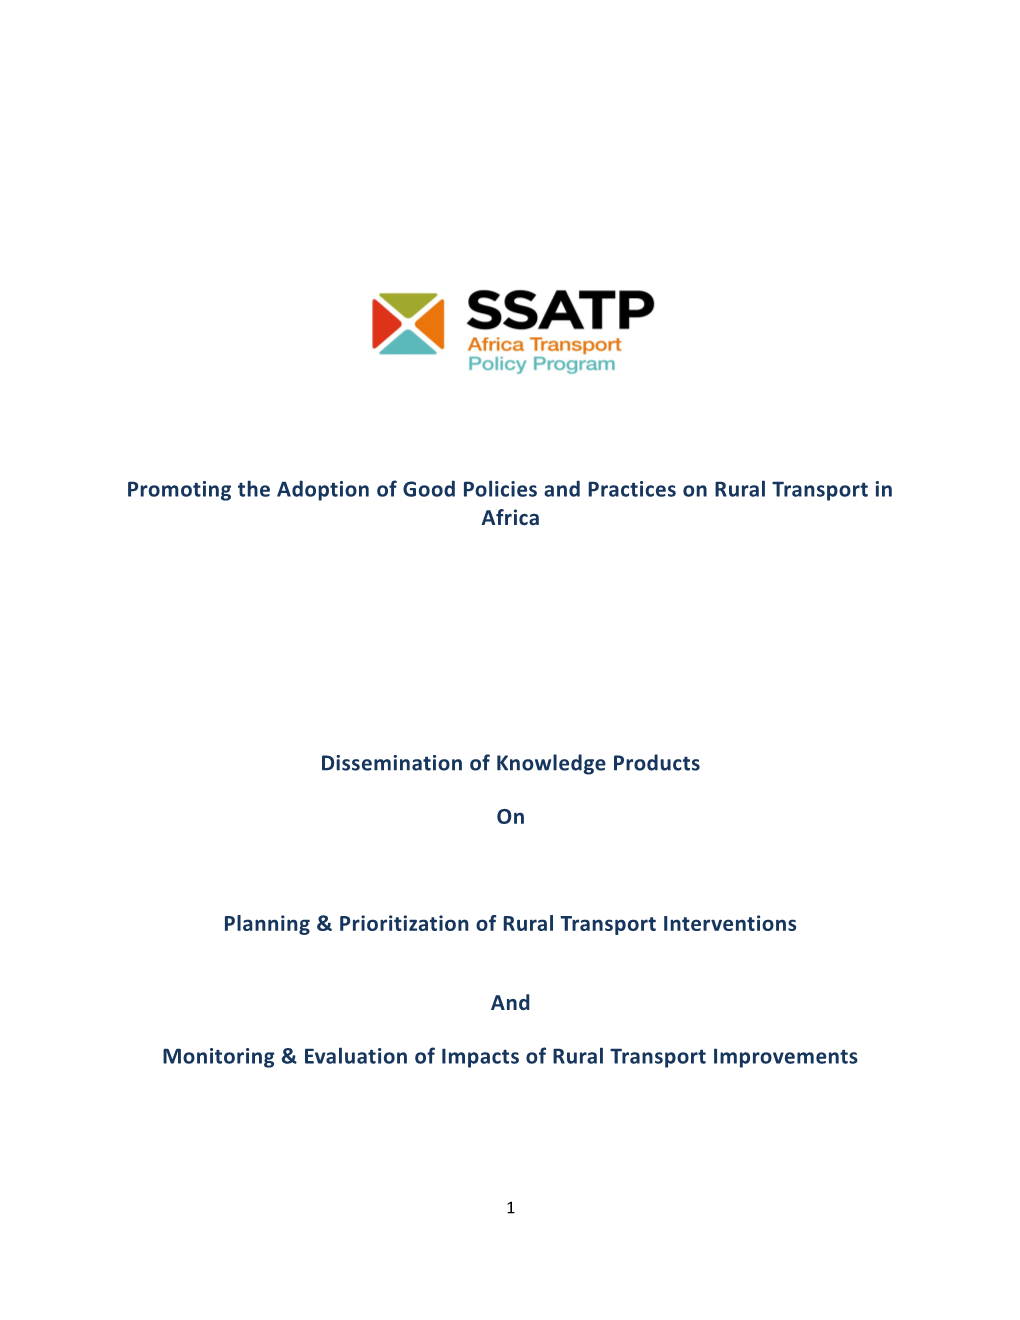 SSATP Promoting the Adoption of Good Policies and Practices on Rural Transport in Africa